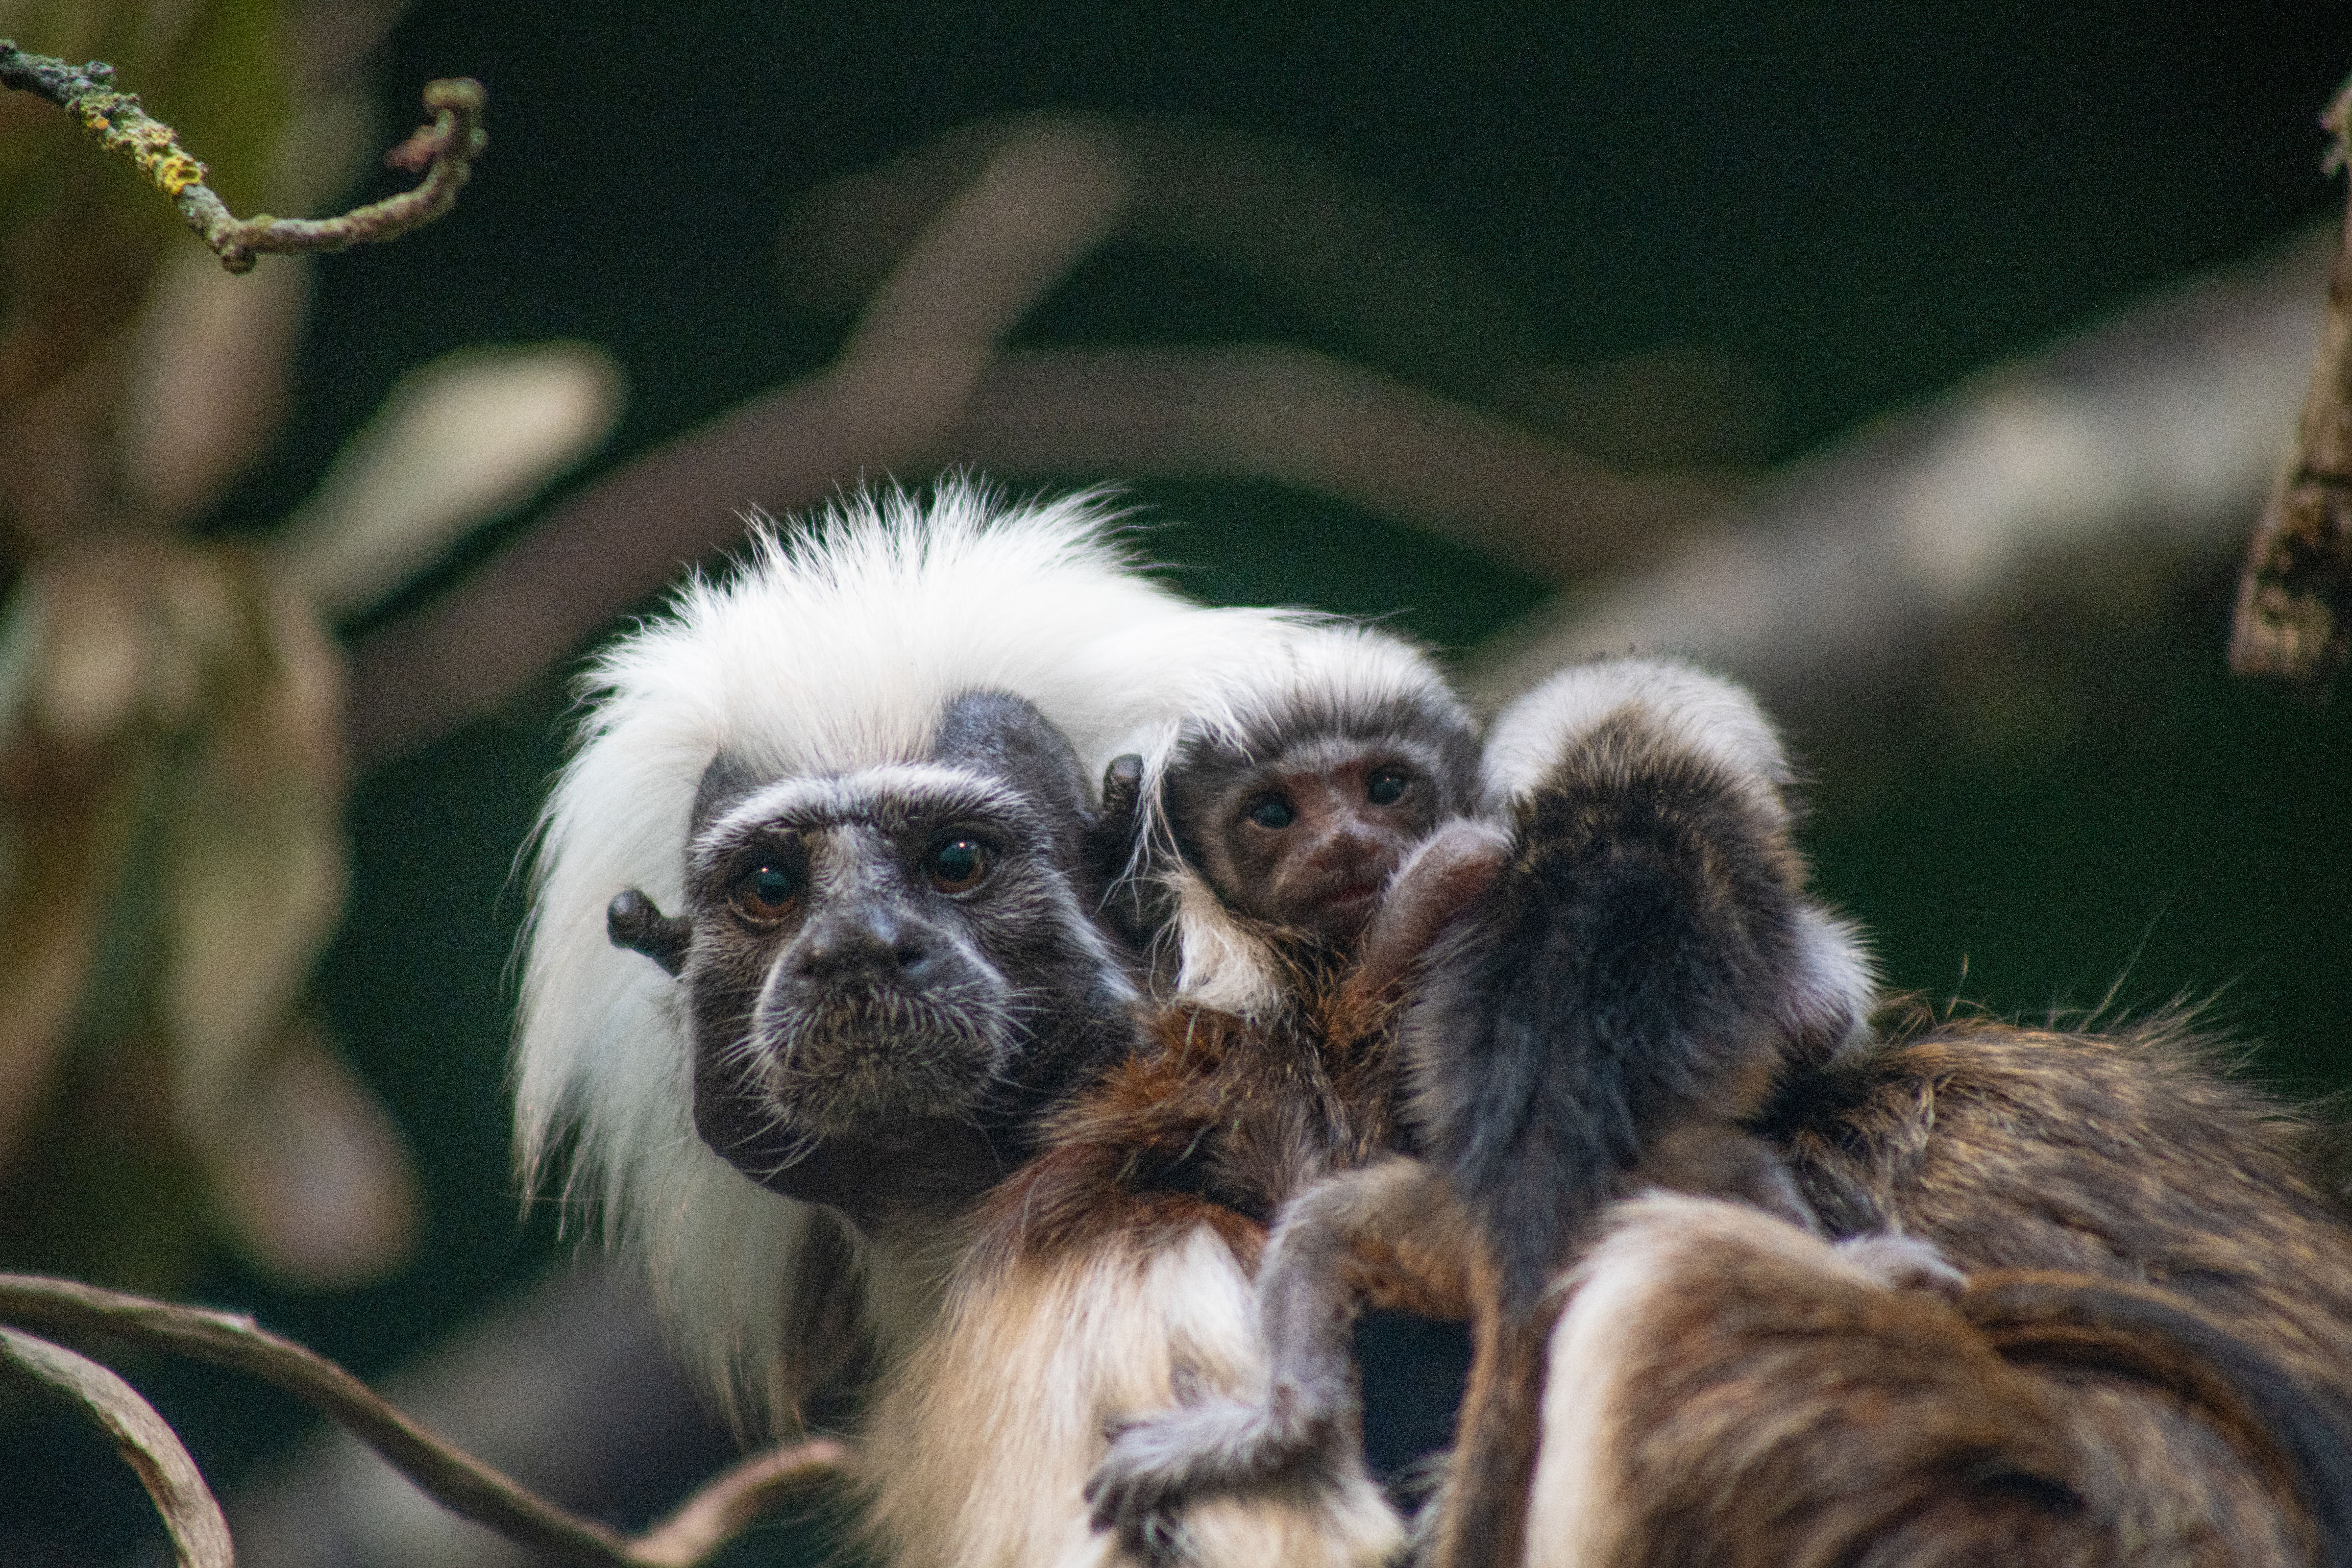 A Hampshire zoo is celebrating after “incredibly rare” cotton-headed tamarin triplets were born to first-time parents (Marwell Zoo/PA)